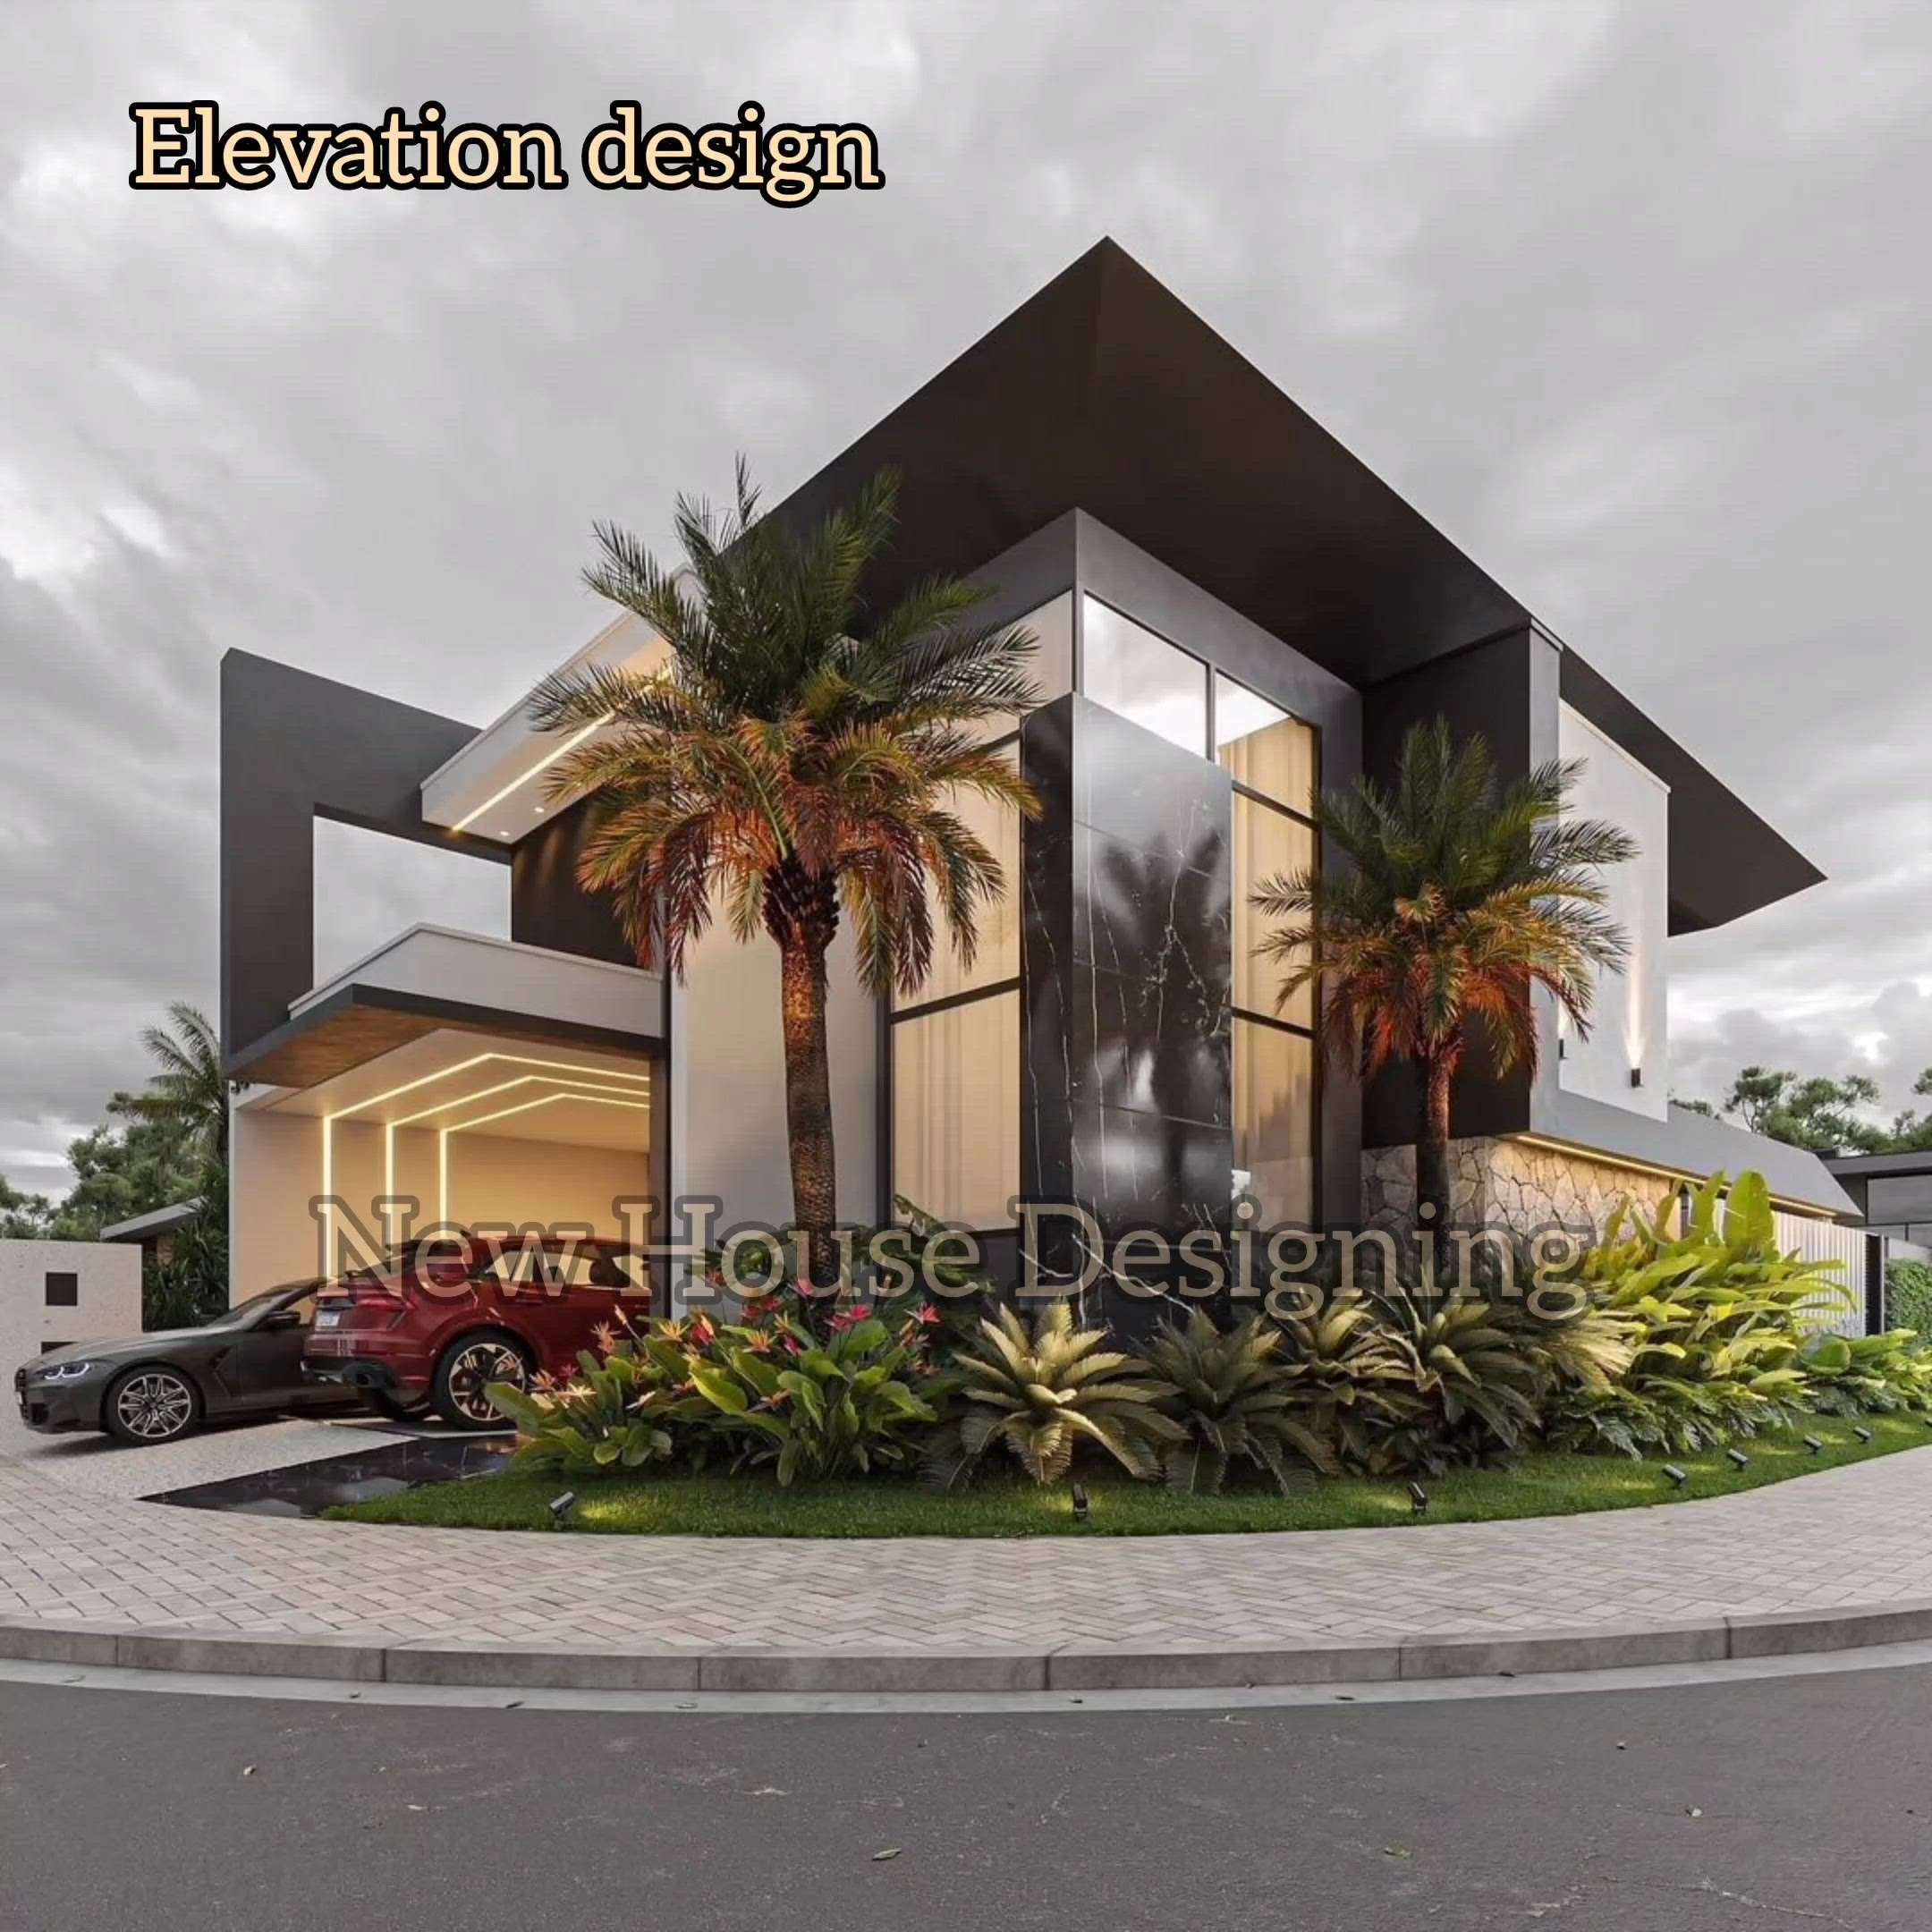 New Elevation Design Call Now For House designing 7340472883
#elevation #architecture #design #interiordesign #construction #elevationdesign #architect #love #interior #d #exteriordesign #motivation #art #architecturedesign #civilengineering #u #autocad #growth #interiordesigner #elevations #drawing #frontelevation #architecturelovers #home #facade #revit #vray #homedecor #selflove #instagood

#designer #explore #civil #dsmax #building #exterior #delevation #inspiration #civilengineer #nature #staircasedesign #explorepage #healing #sketchup #rendering #engineering #architecturephotography #archdaily #empowerment #planning #artist #meditation #decor #housedesign #render #house #lifestyle #life #mountains #buildingelevation